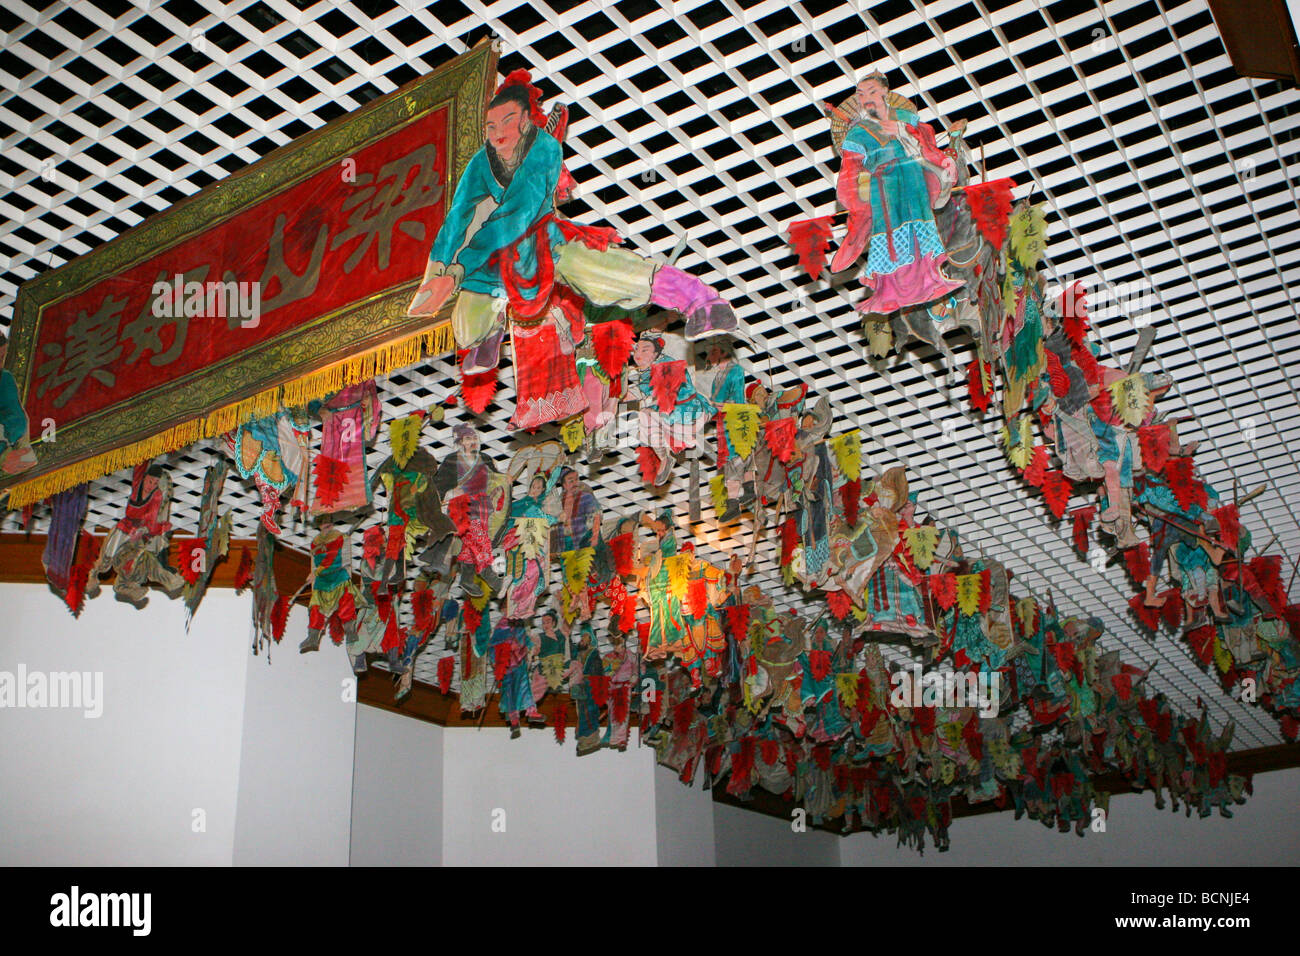 Kites with Liangshan Heroes design, The Kite Museum, Weifang, Shandong Province, China Stock Photo